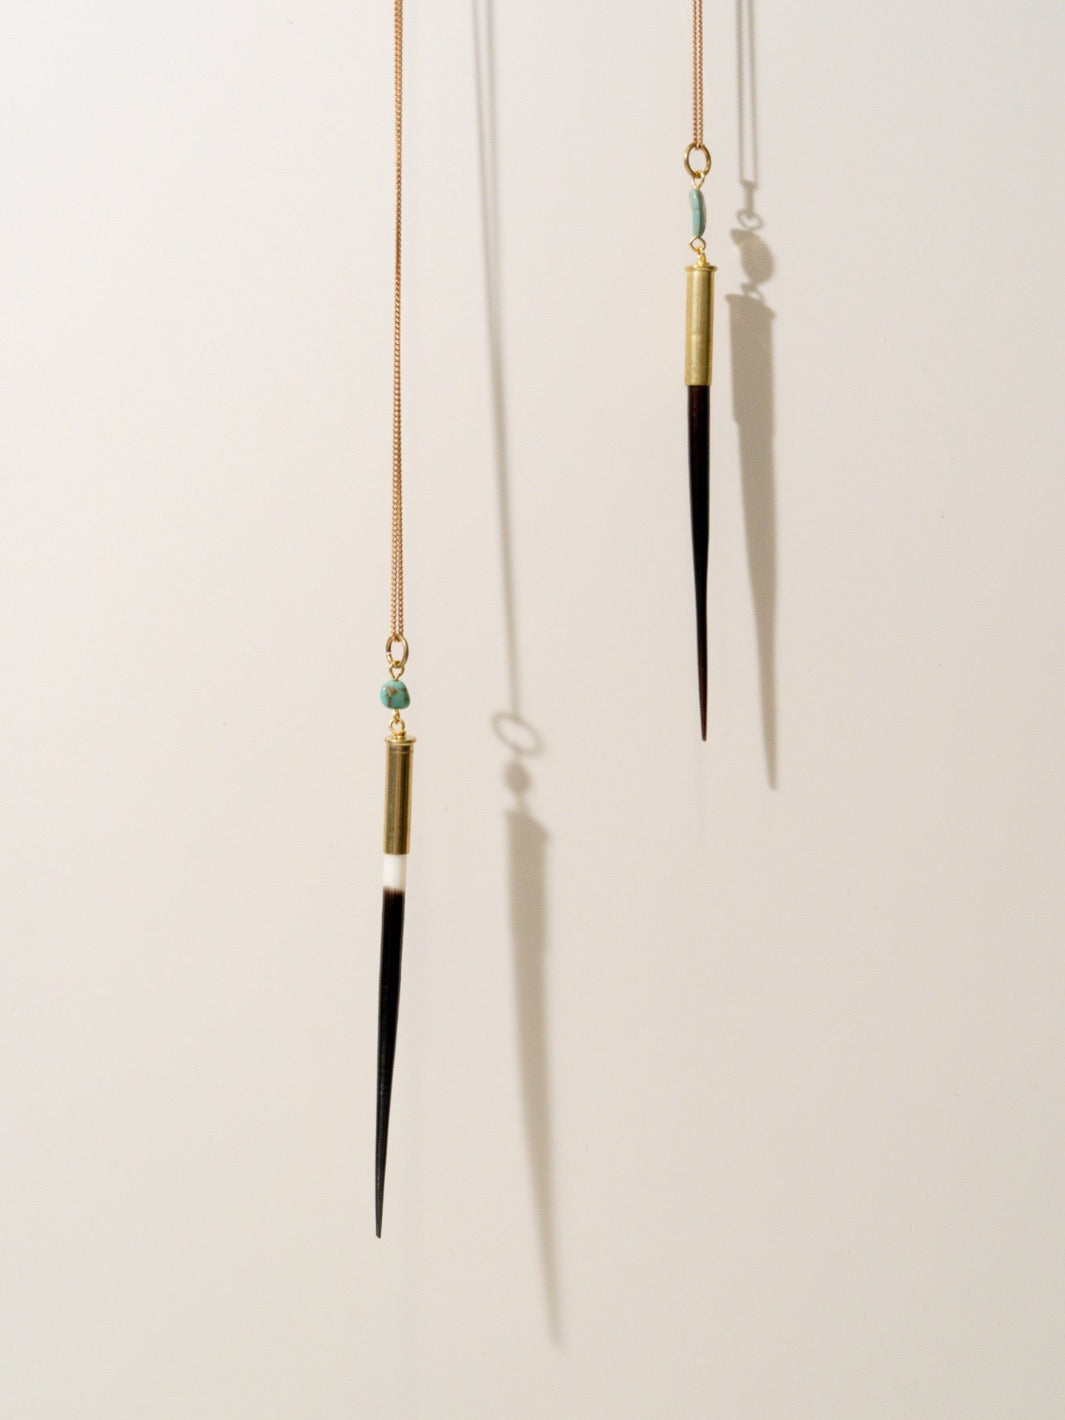 Quill + Turquoise Necklace - Heyday